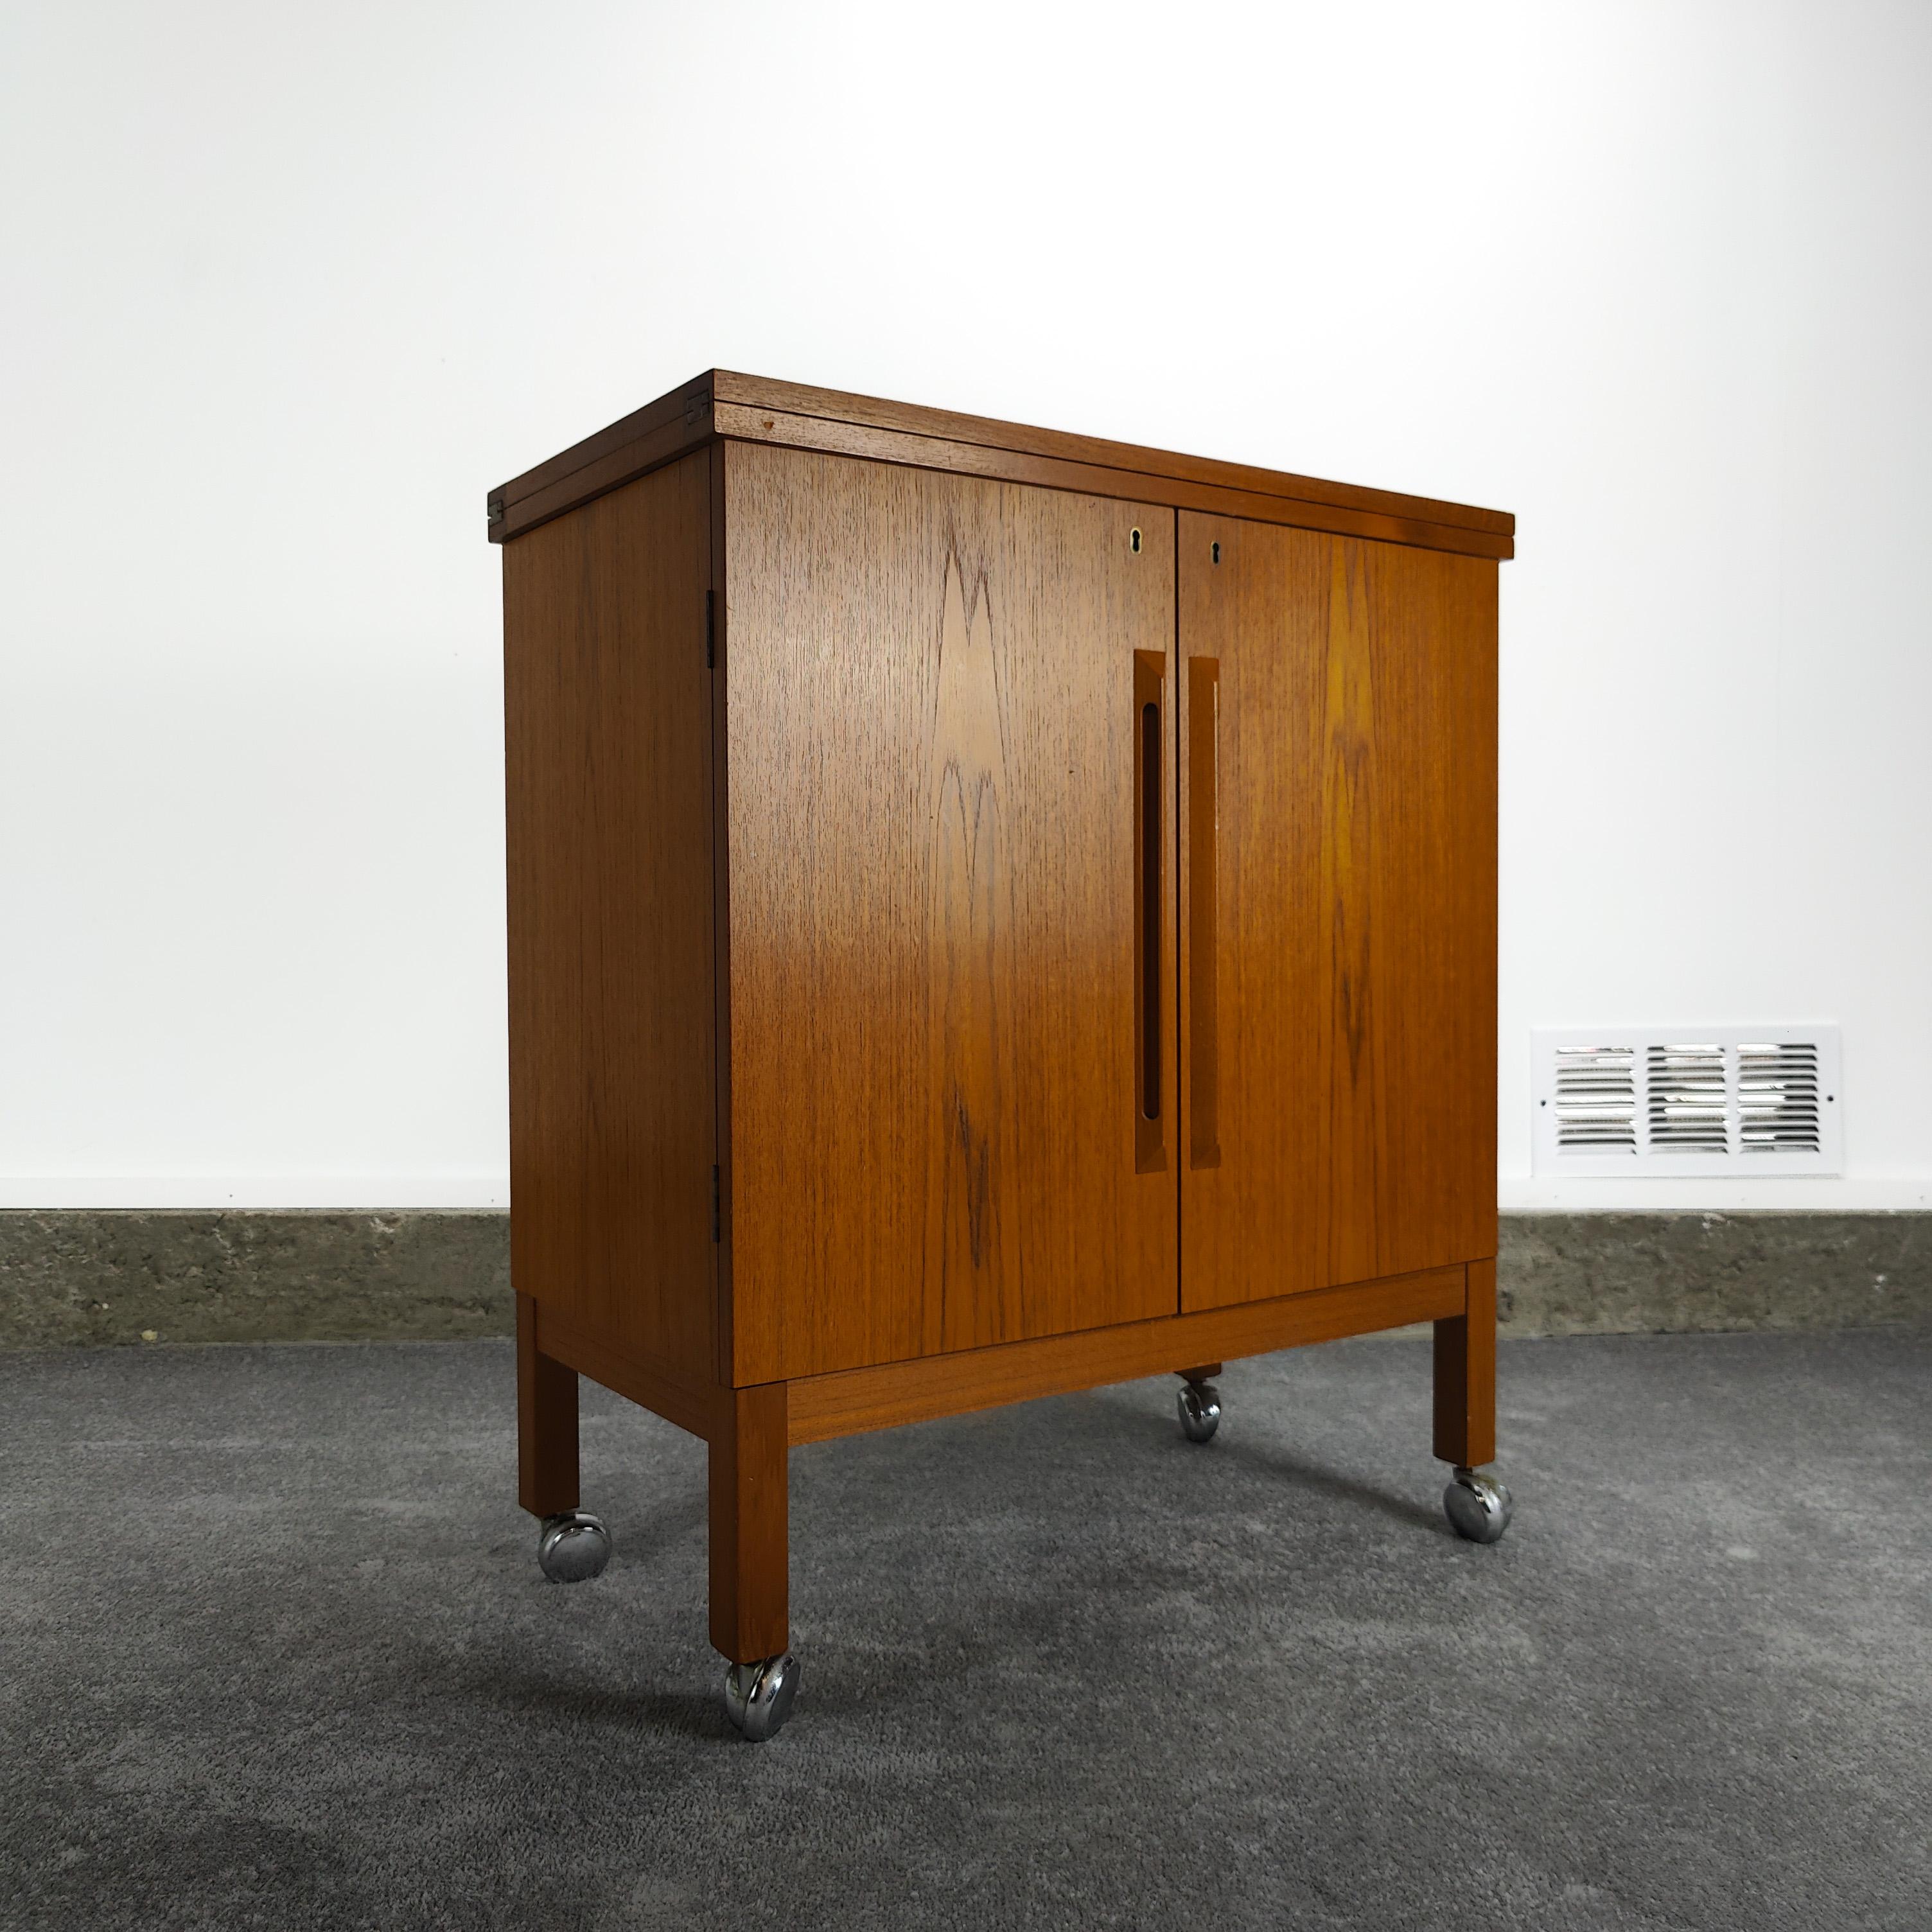 Now available, a versatile flip top bar cabinet designed by Torbjørn Afdal by Mellemstrands Møbelfabrik/Bruksbo in Norway, circa 1960s. Features a warm teak grain and clean with a solid surface black 